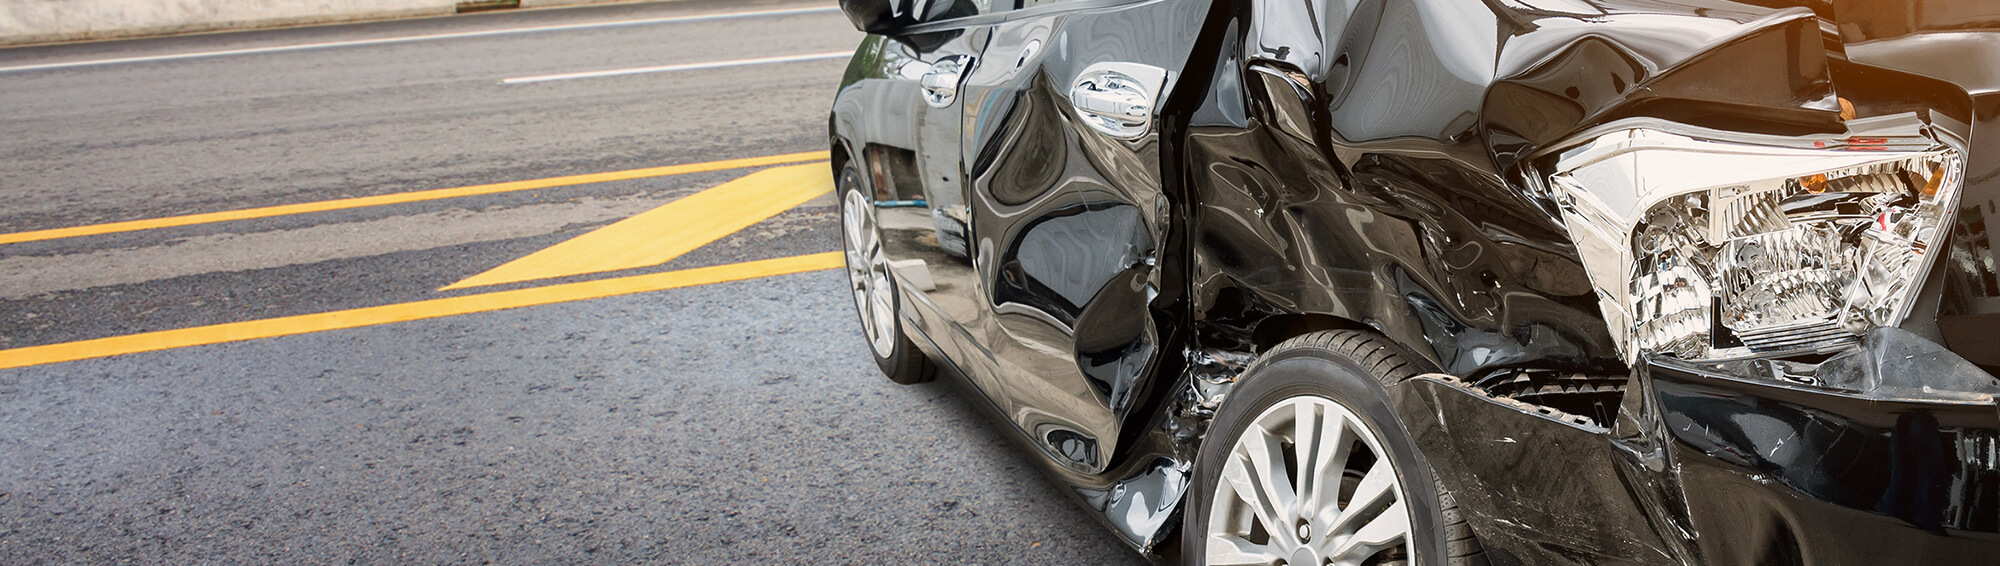 Don’t Get Too Dependent on New Vehicle Safety Features